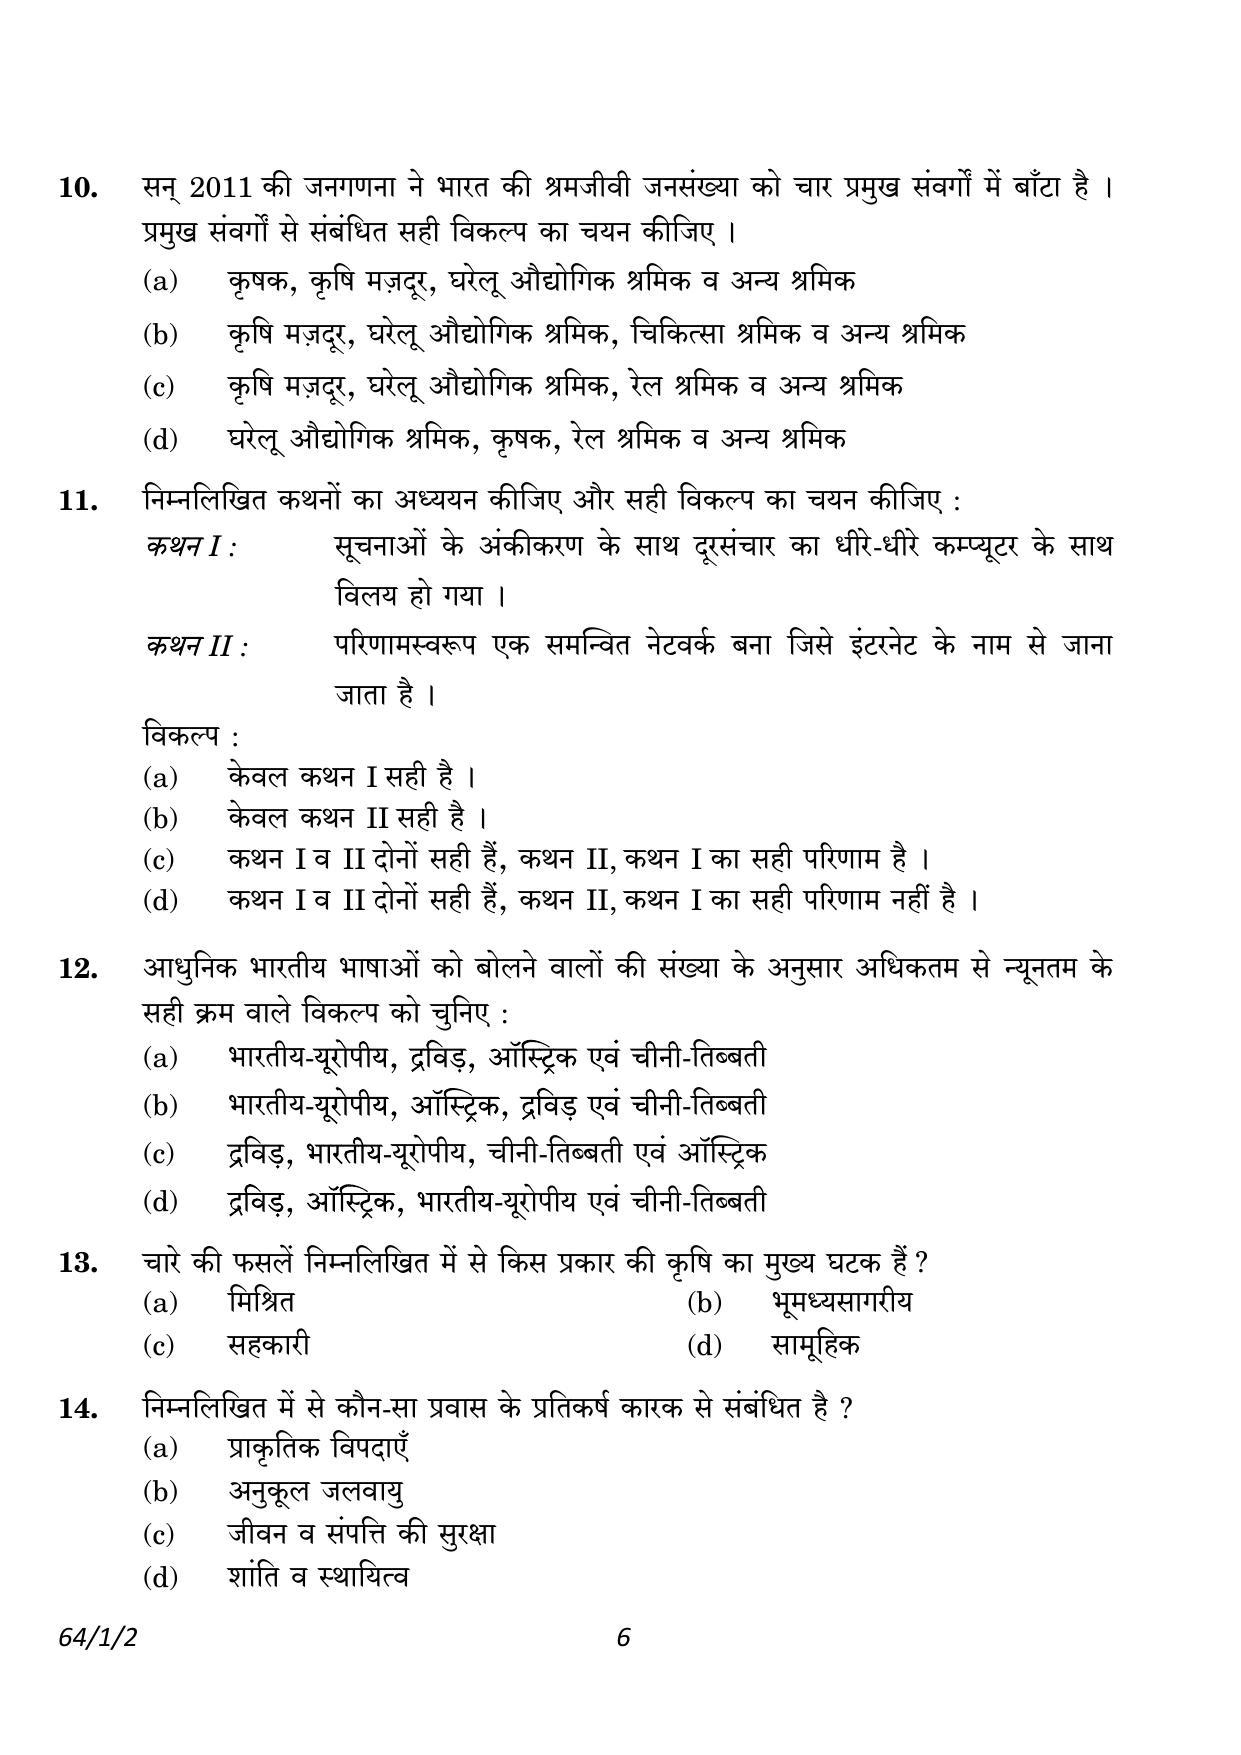 CBSE Class 12 64-1-2 Geography 2023 Question Paper - Page 6